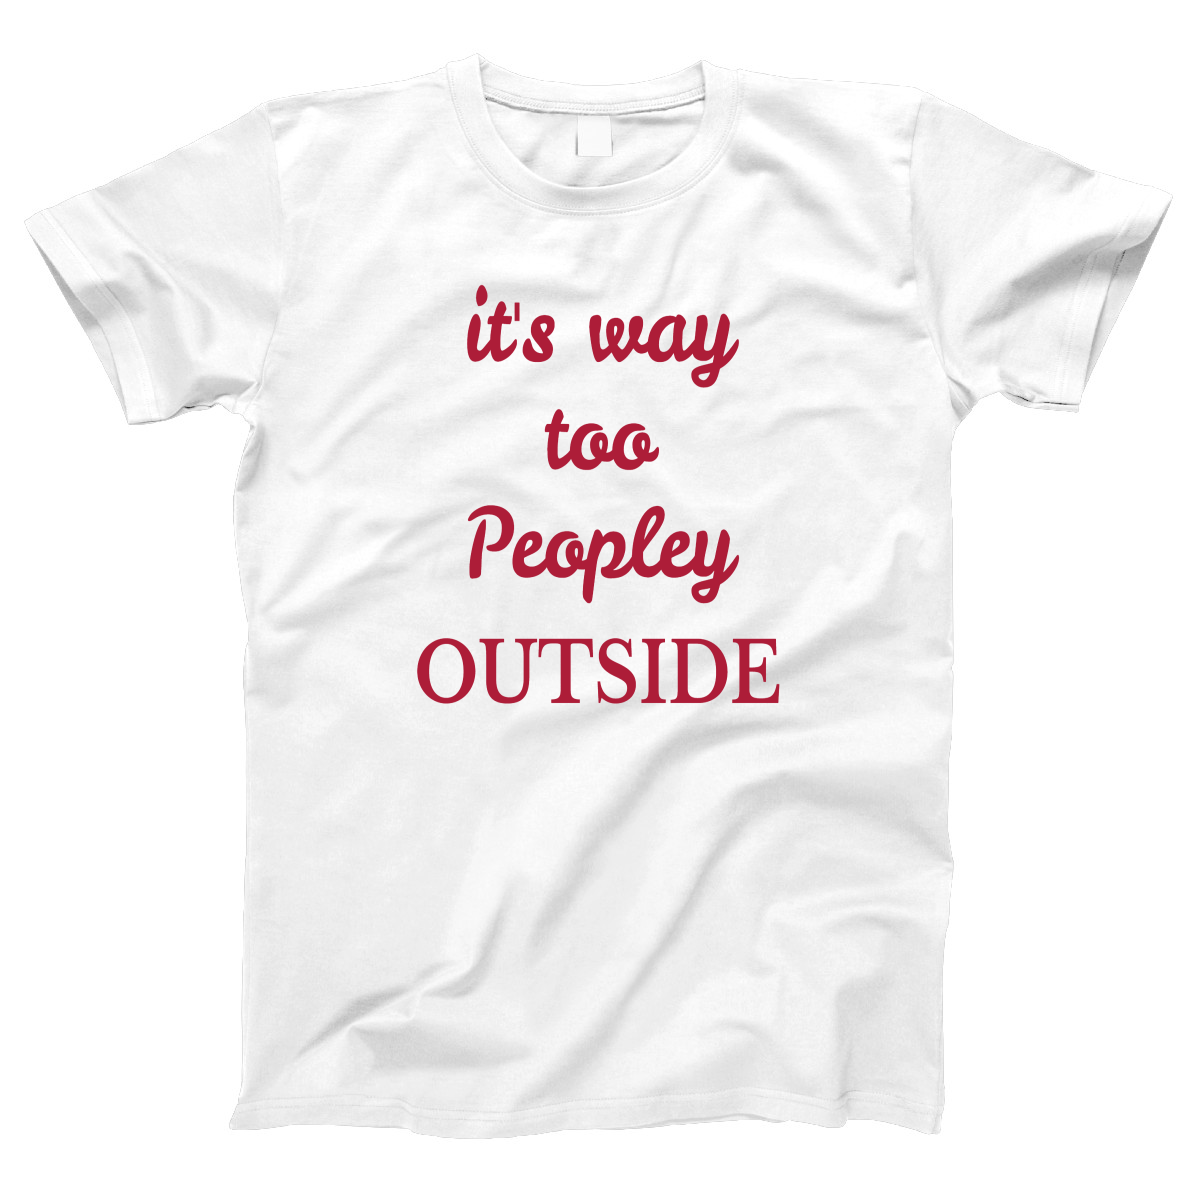 It's way Too Peopley Outside Women's T-shirt | White